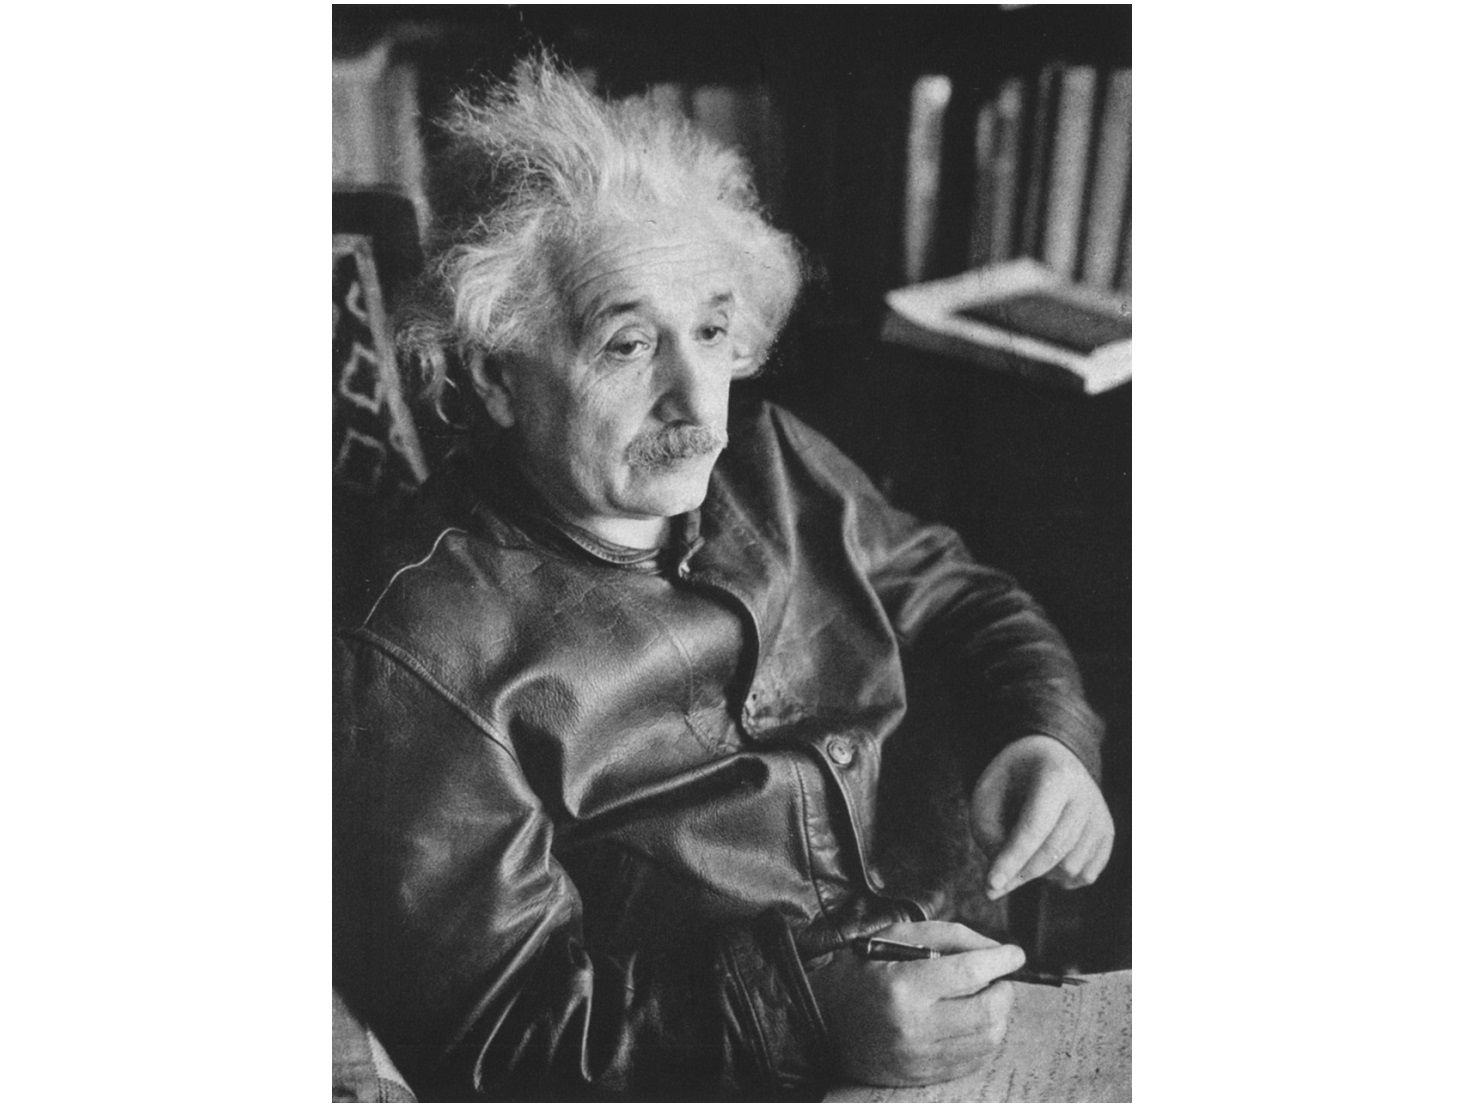 Levi's Vintage Clothing Collabs with Albert Einstein